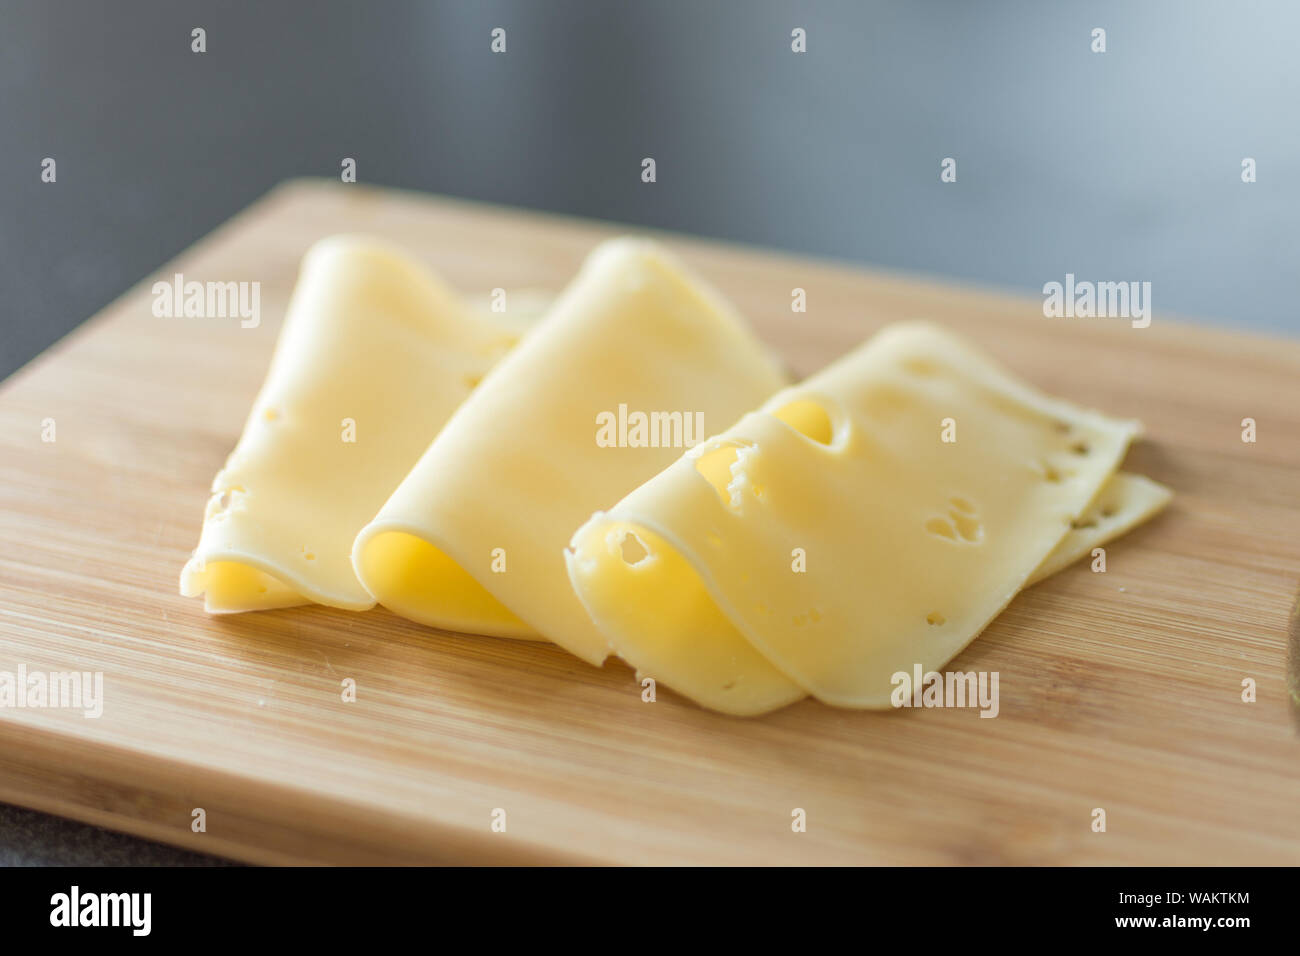 Slices of cheese on wooden background. Holland cheese with holes. Stock Photo